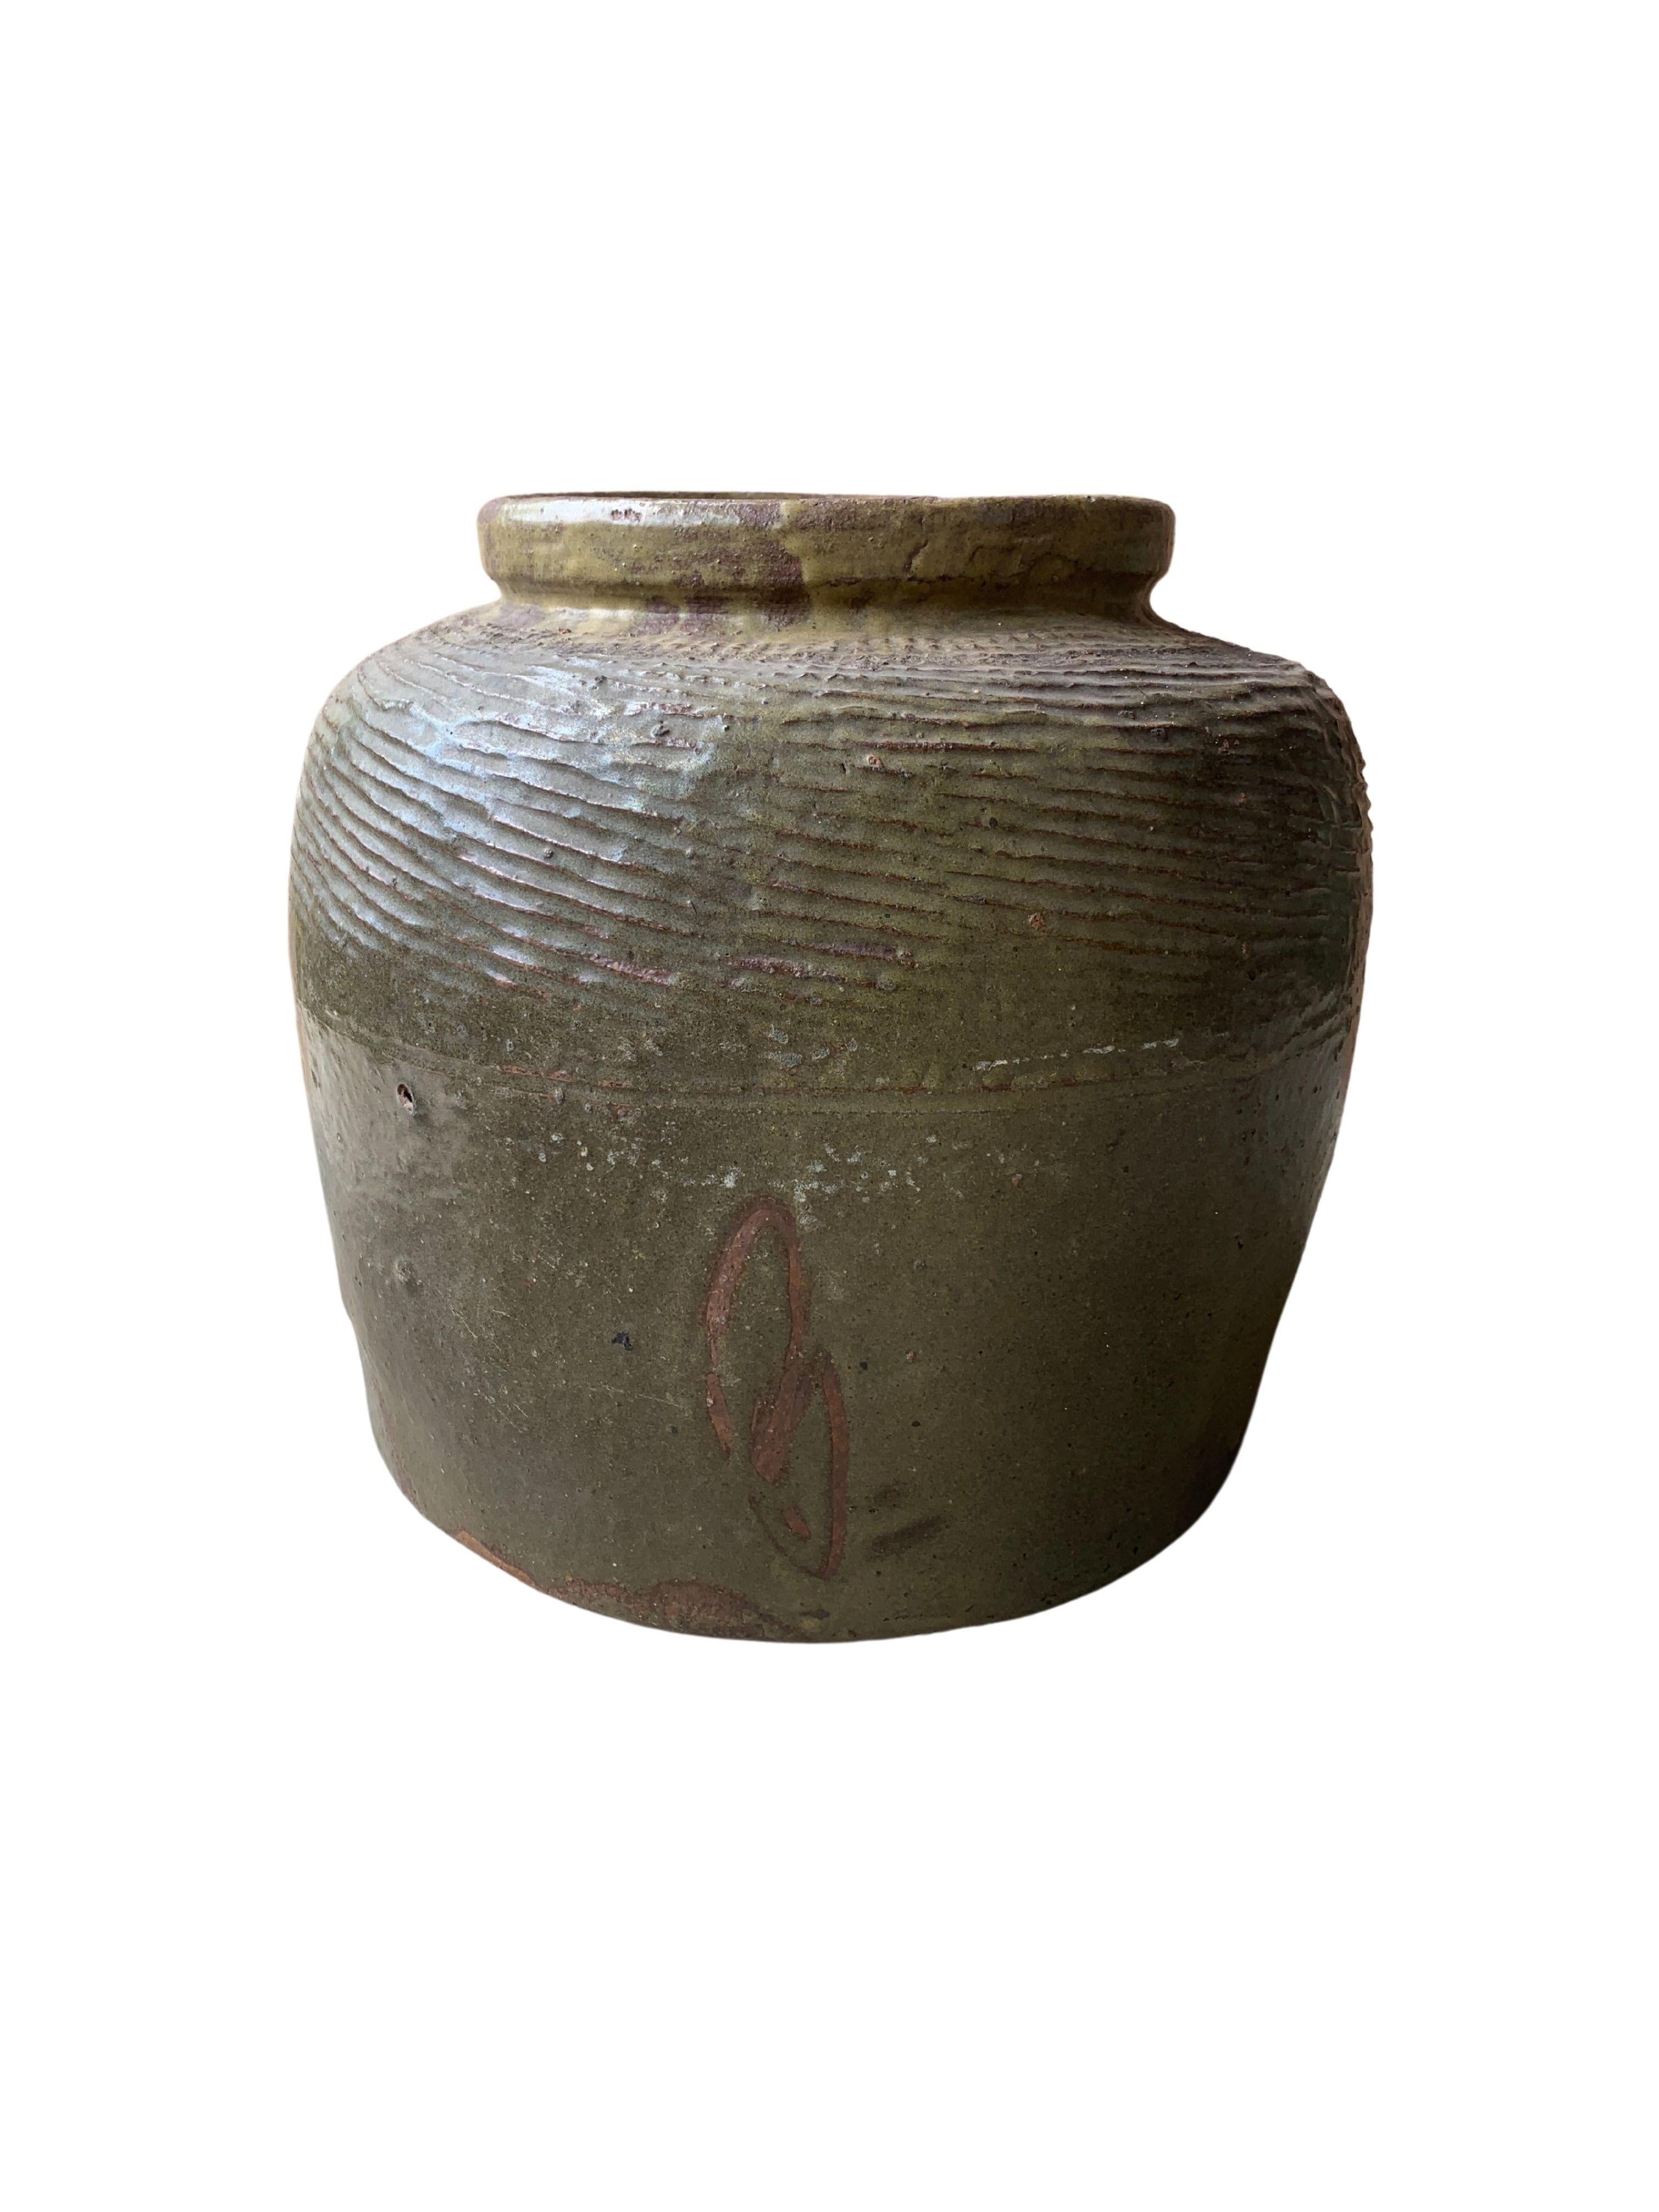 This glazed Chinese ceramic jar was once used for pickling foods. It features a jade green finish and outer surface that features a ribbed texture. A great example of Chinese pottery, with its imperfections and ageing over the years contributing to